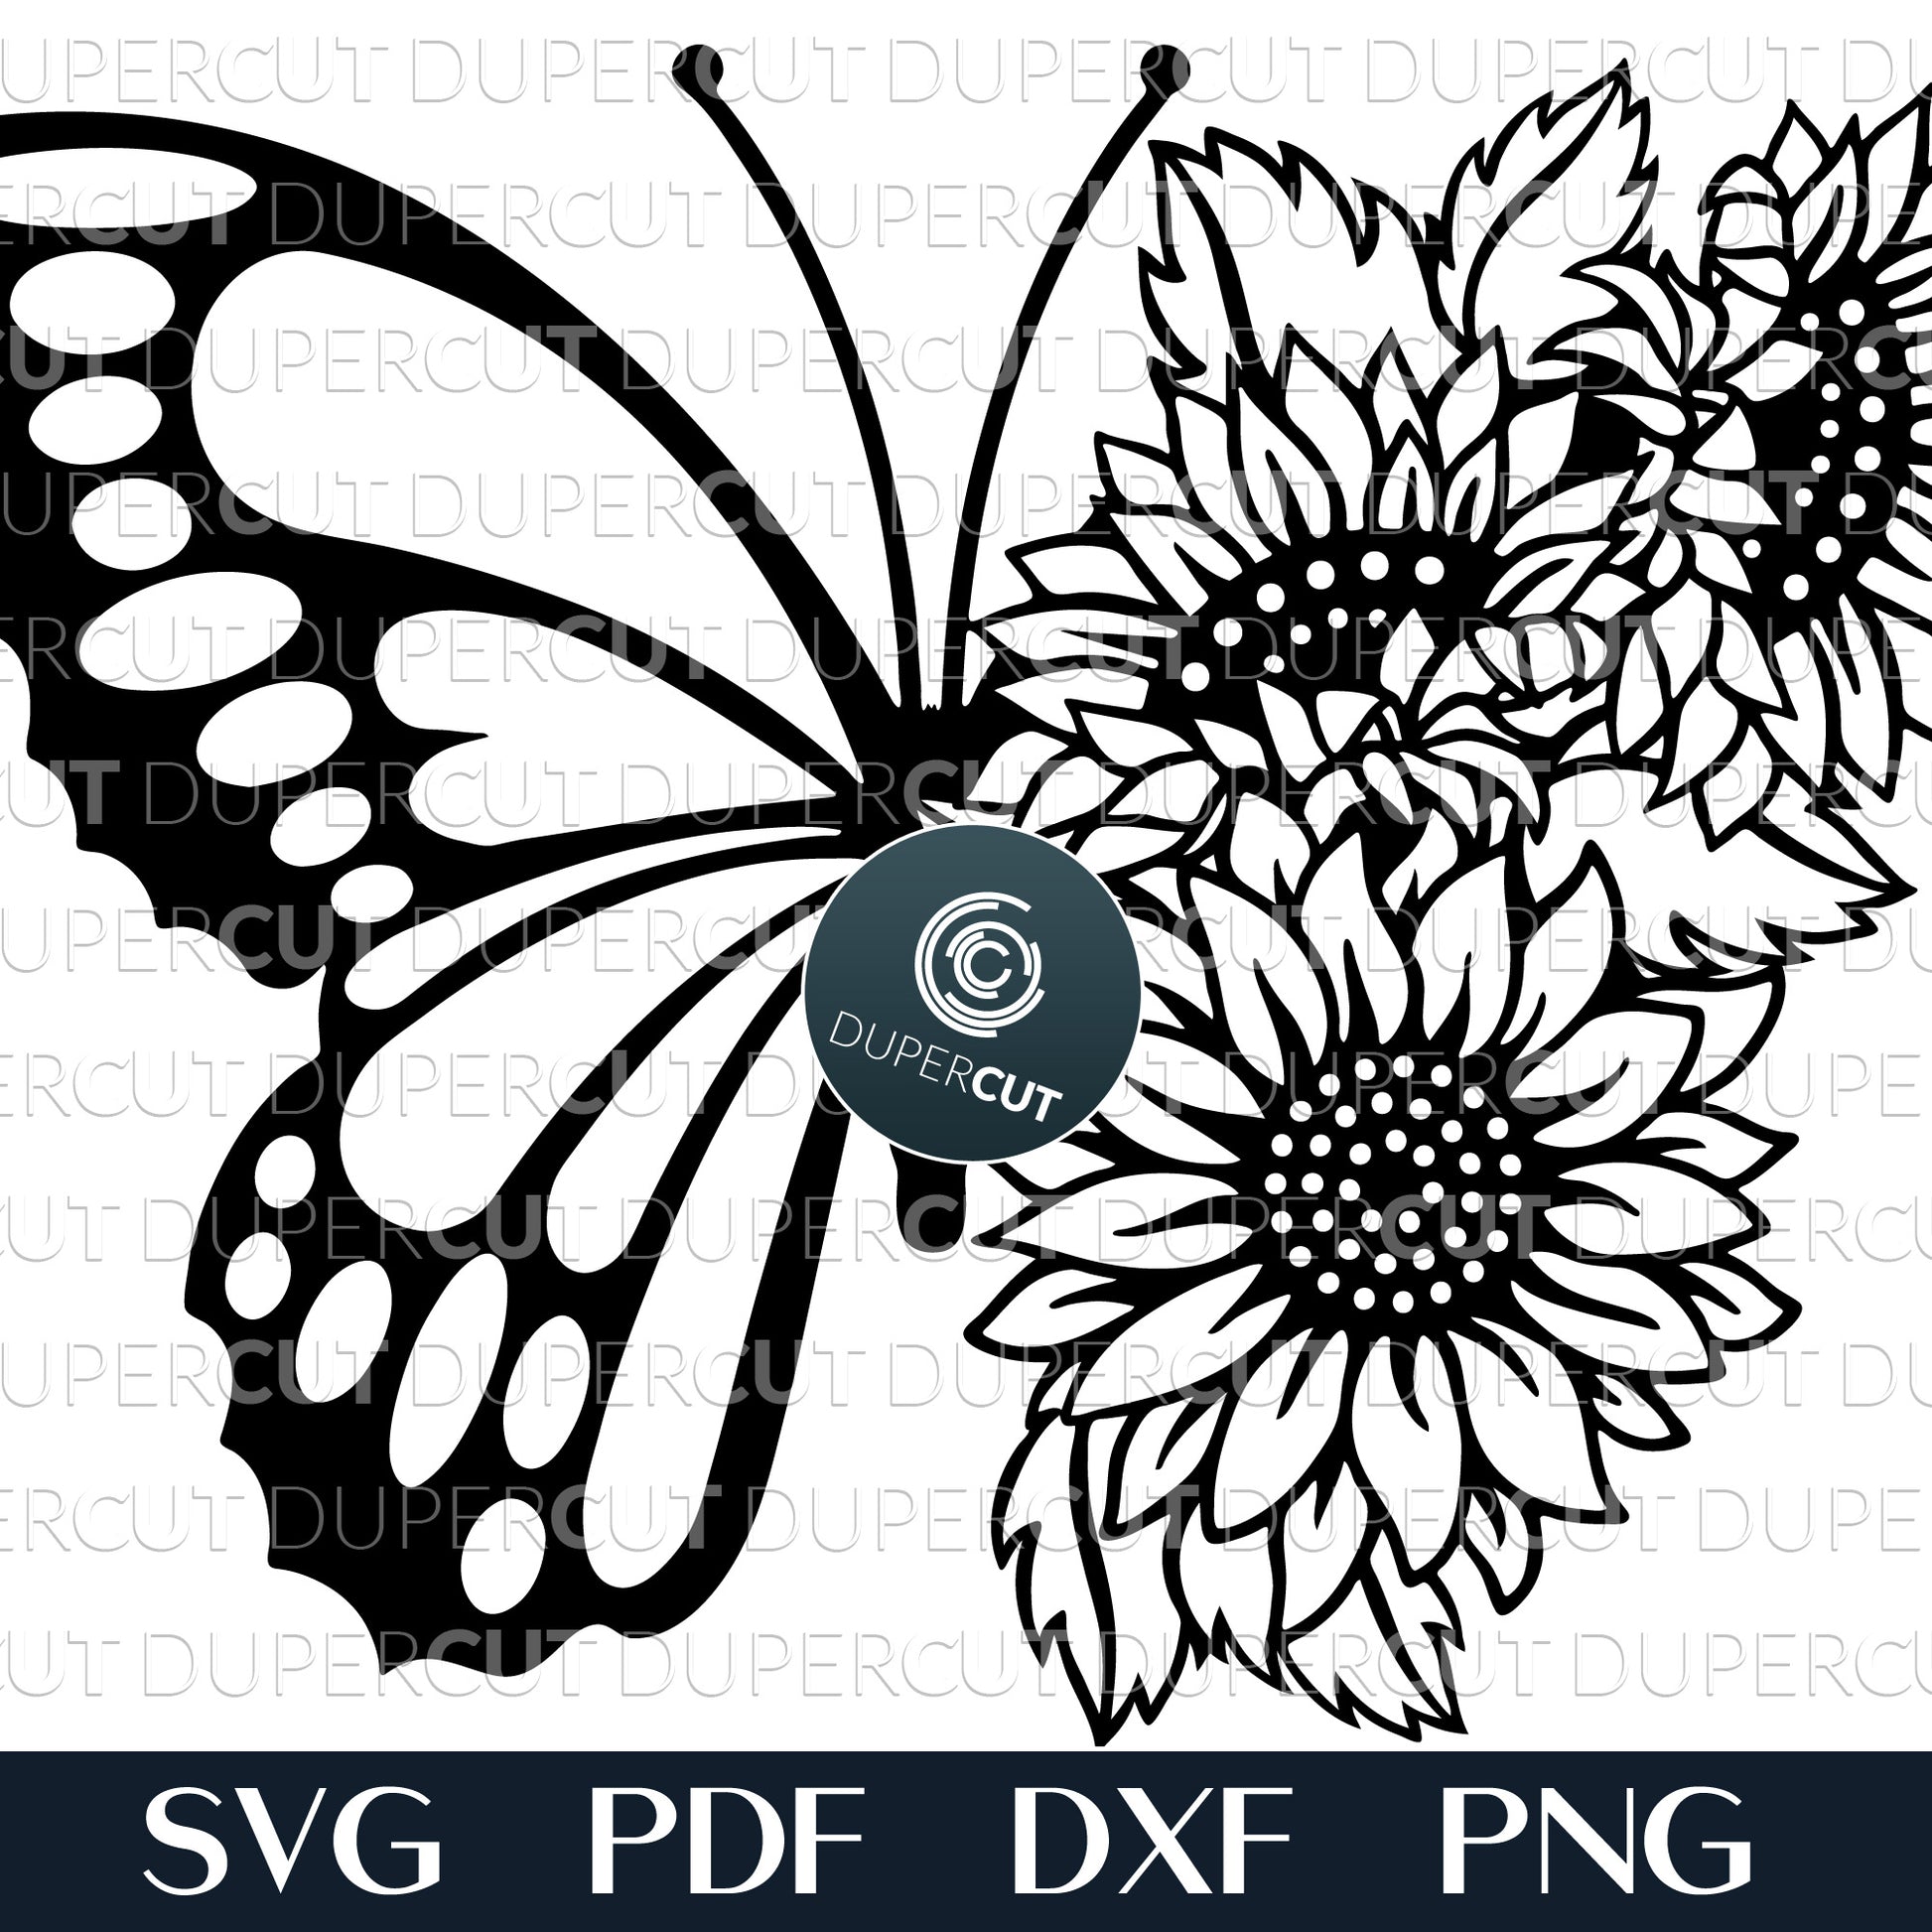 Half butterfly floral illustration, paper cutting template - SVG PDF DXF layered vector files for laser cutting and engraving. For use with Glowforge, Cricut, Silhouette, CNC plasma machines